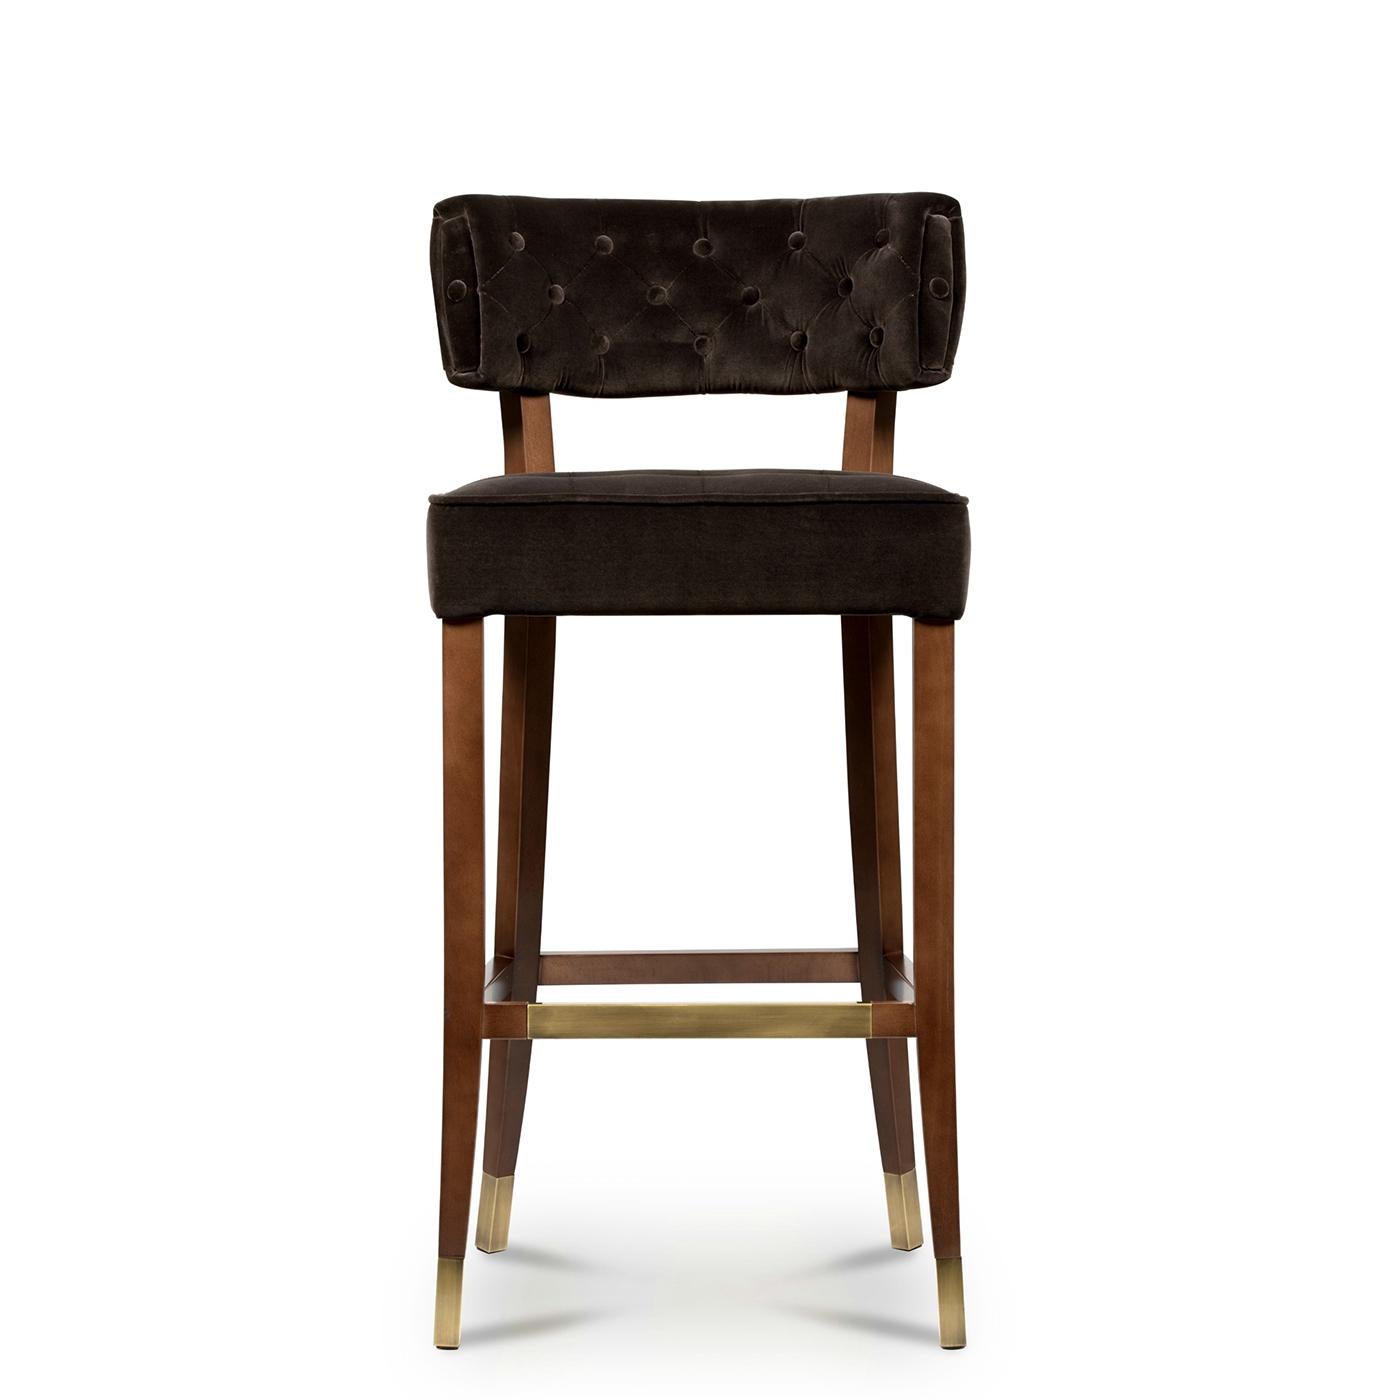 Bar stool Erny with solid walnut wood structure,
upholstered and covered with Grade A velvet fabric.
With capitonated seat and backrest. With reinforced
footrest and feet in solid brass in brushed finish.
Also available with other fabric colors